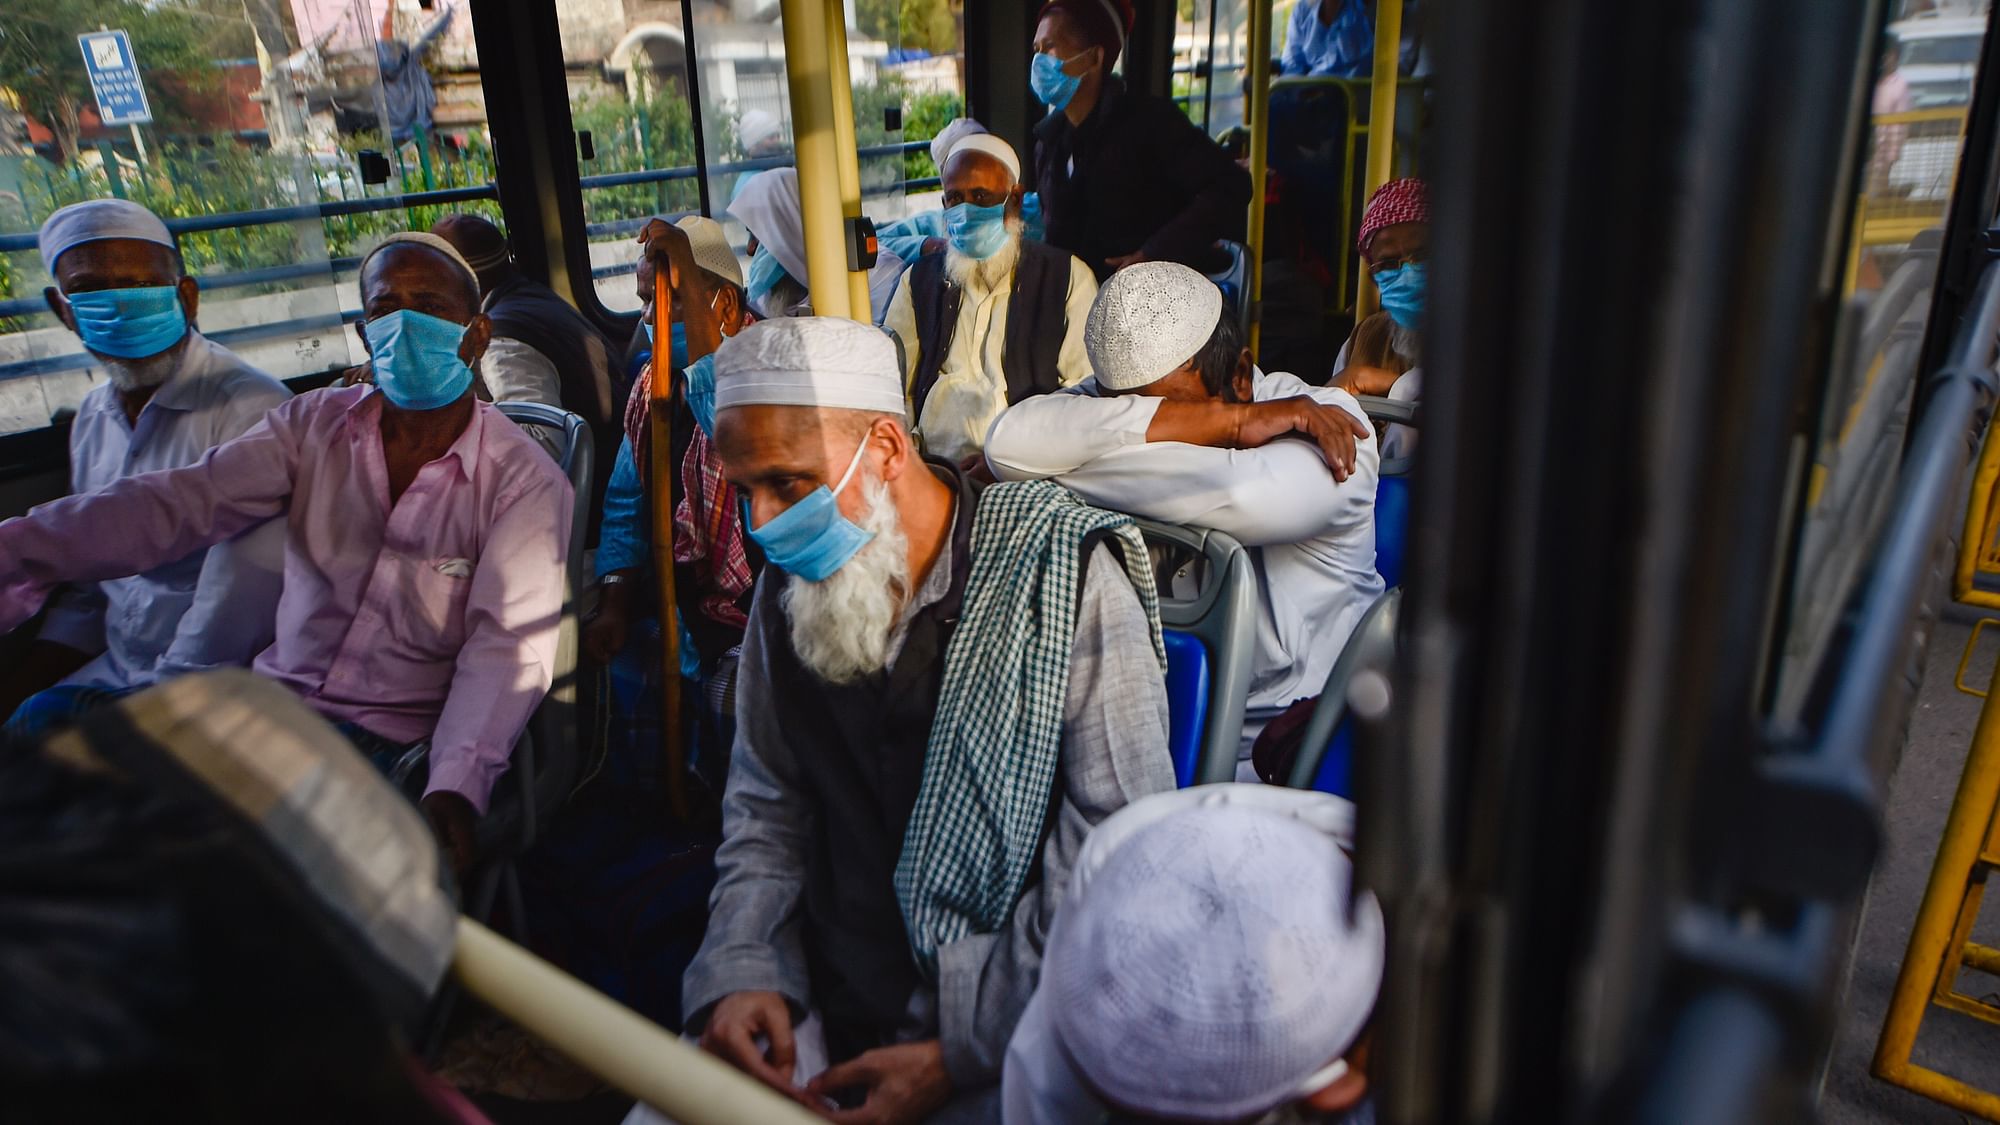 People wearing masks leave for hospital in a bus from Nizamuddin area, after several people showed symptoms of coronavirus. Image used for representational purpose.